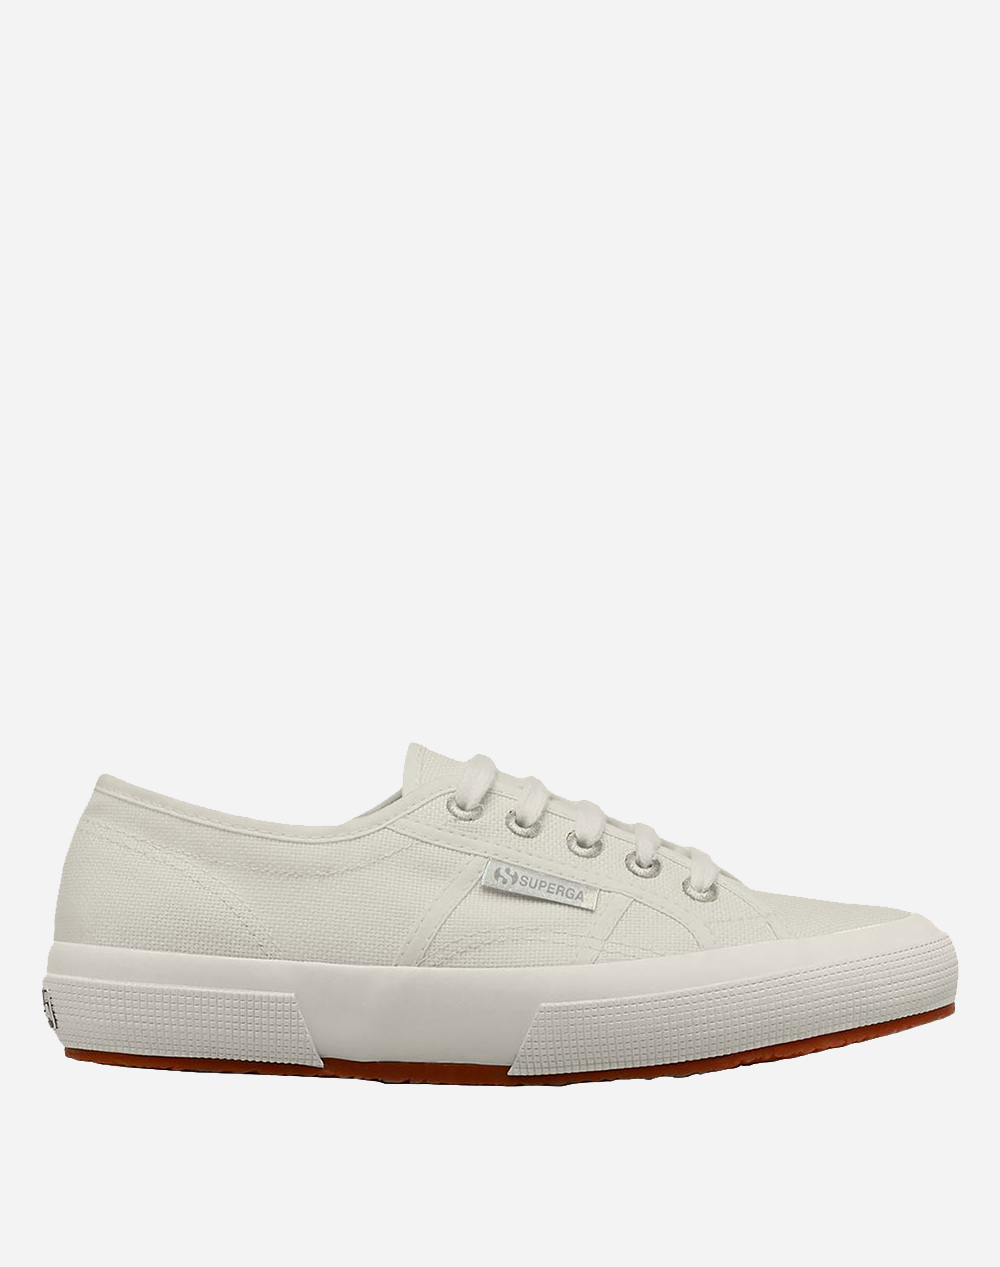 SUPERGA 2750 ORGANIC CANVAS SNEAKERS ΓΥΝΑΙΚΕΙΑ S2111KW-A0A White 3410ASRGA6070012_XR15274